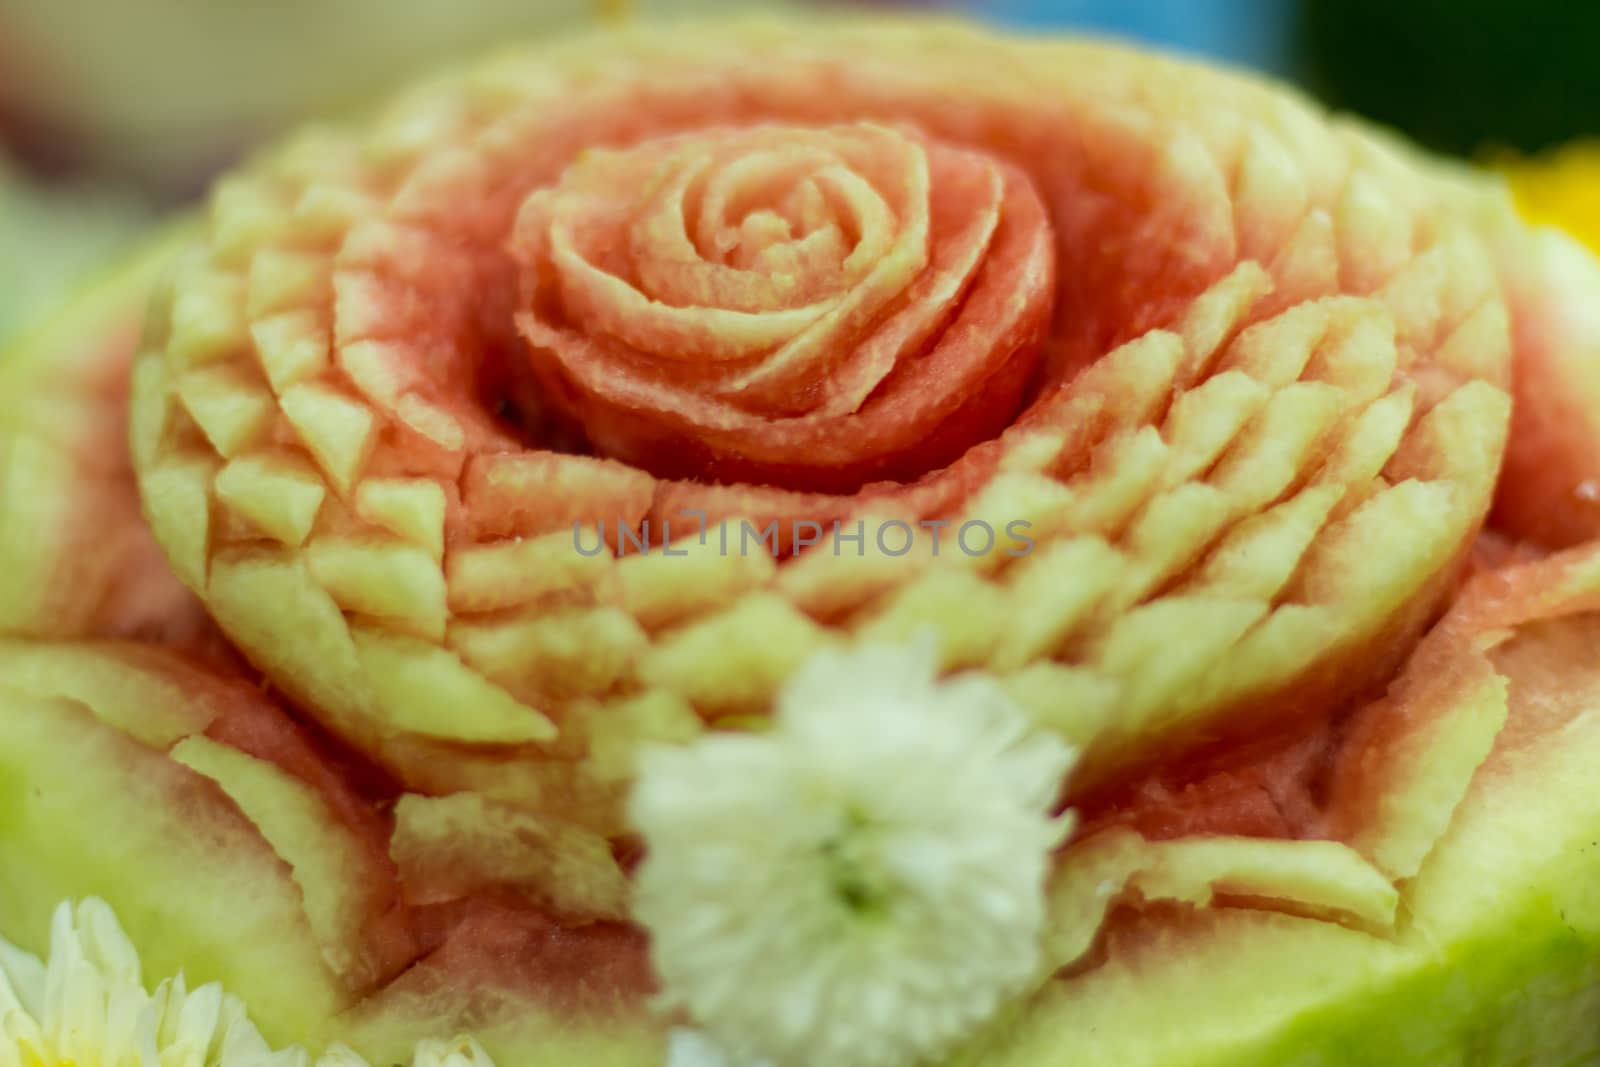 Carving water melon by prajit48